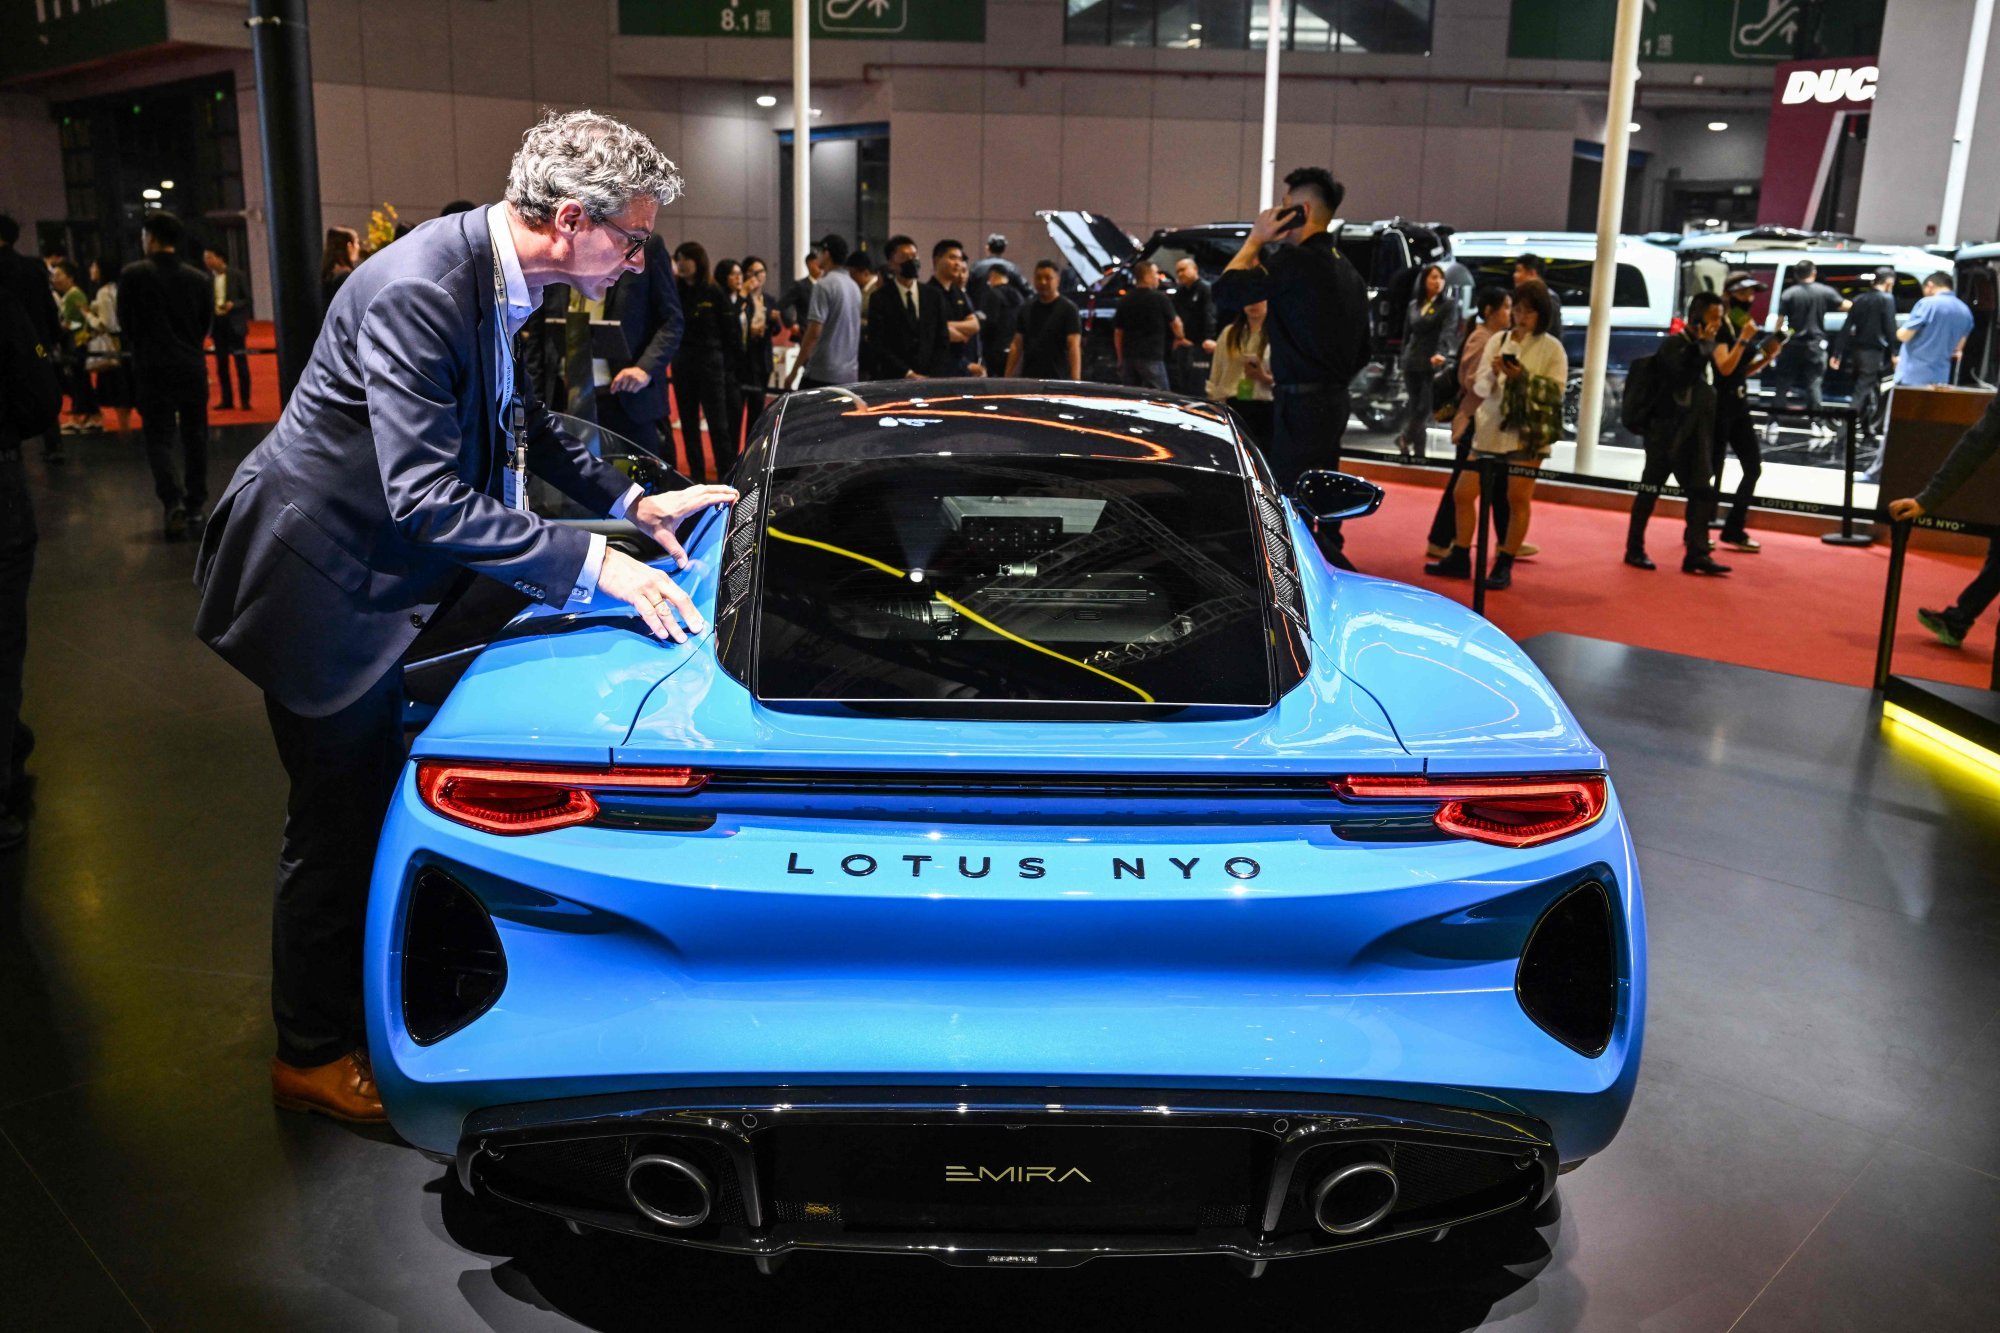 Looks like a supercar, but at half the price: meet the Lotus Emira – Geely's  British brand releases its last gas-powered sports model before going  electric, and it will only set you